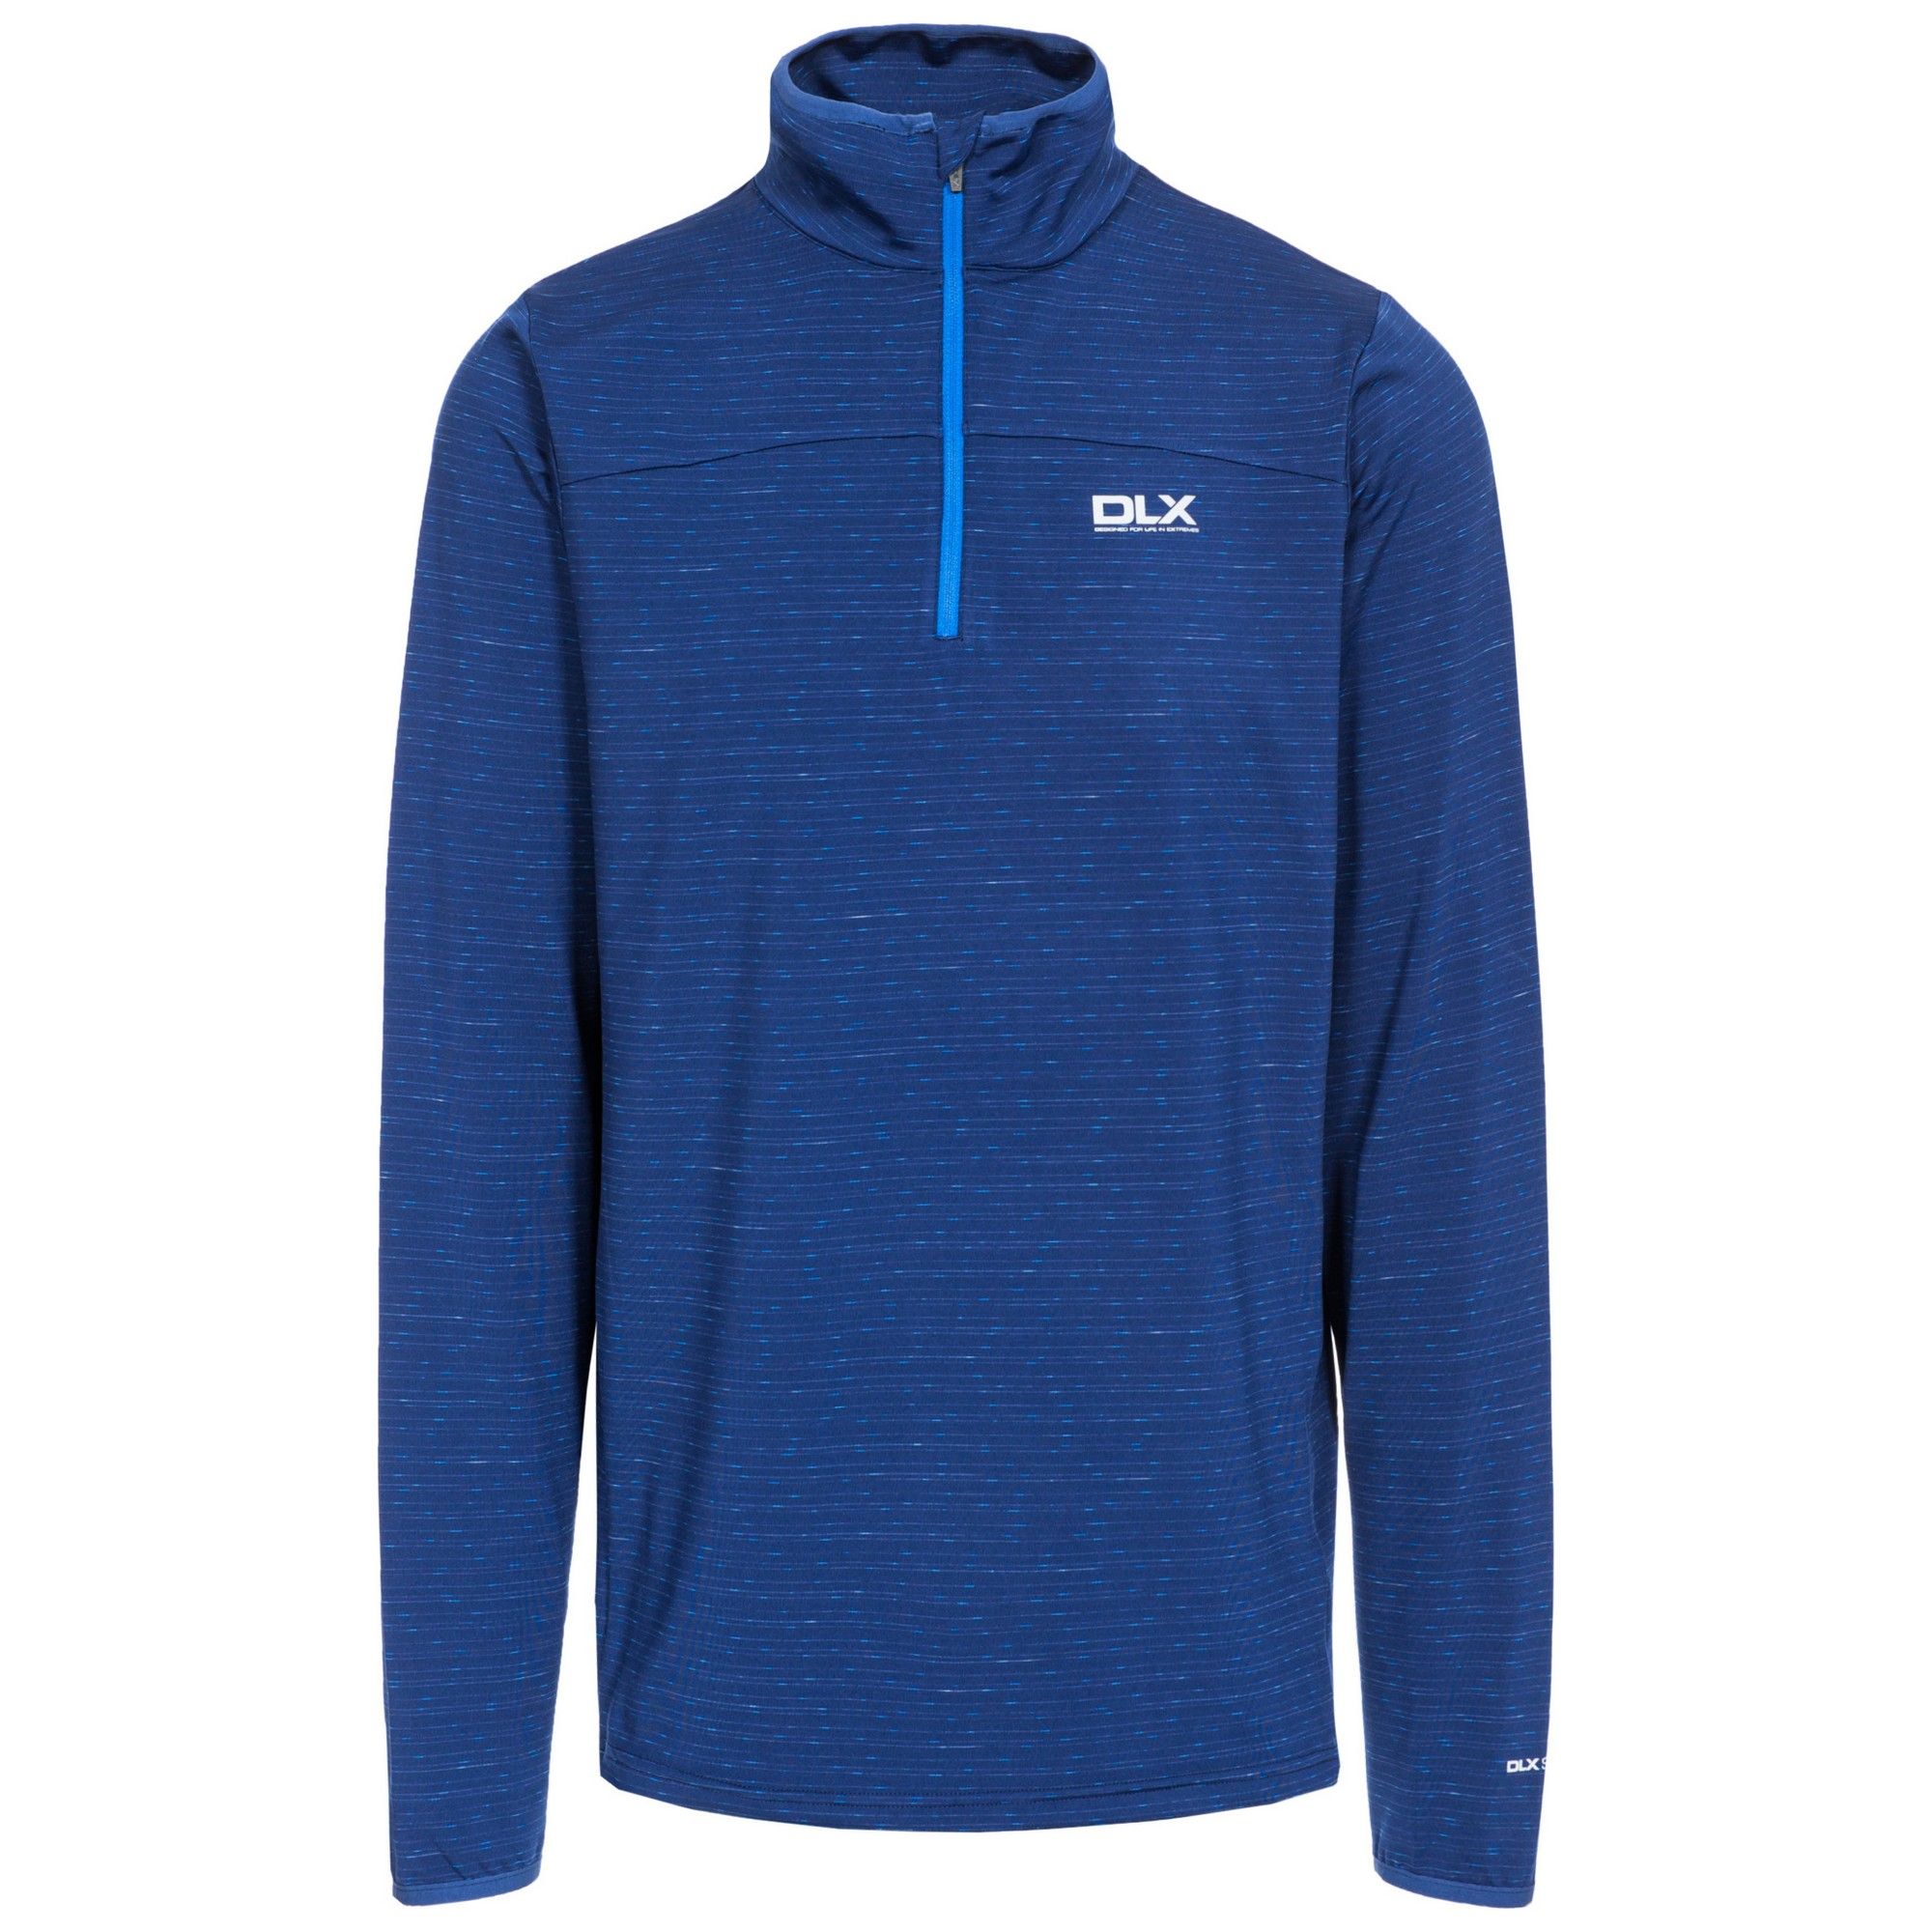 1/2 zip neck. Long sleeves. Zip stripe detail. Stretch binding at cuff and neck. Quick dry. 88% Polyester/12% Elastane. Trespass Mens Chest Sizing (approx): S - 35-37in/89-94cm, M - 38-40in/96.5-101.5cm, L - 41-43in/104-109cm, XL - 44-46in/111.5-117cm, XXL - 46-48in/117-122cm, 3XL - 48-50in/122-127cm.